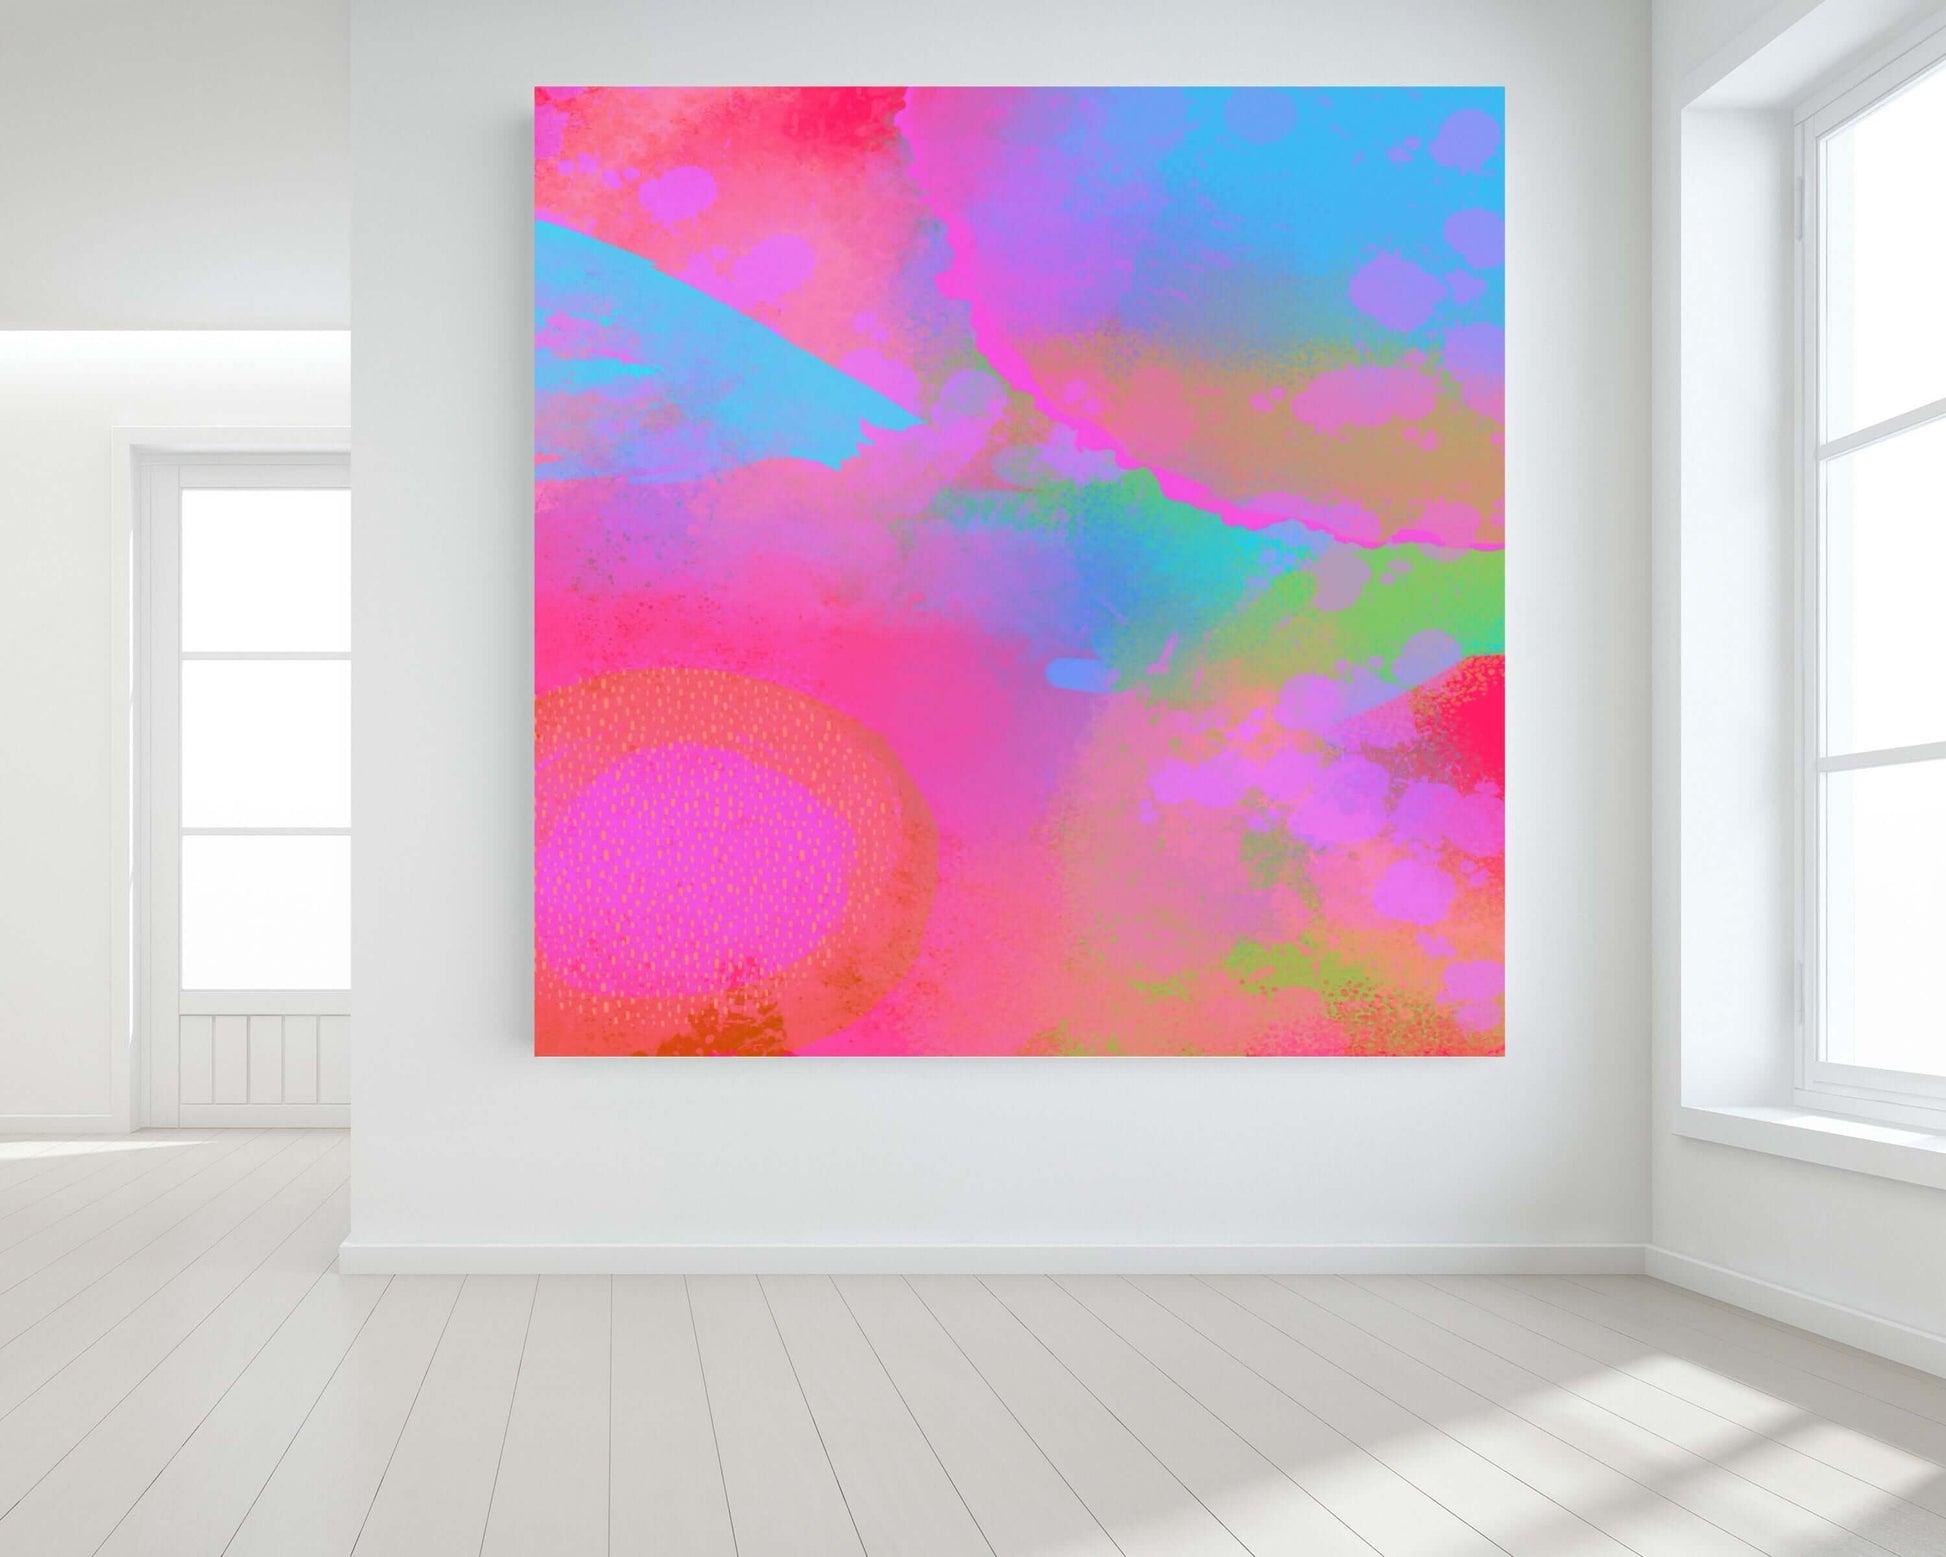 Hot Pink Intergalactic “Between Worlds” Abstract Art Canvas Print Wall Art Large Canvas on Wall